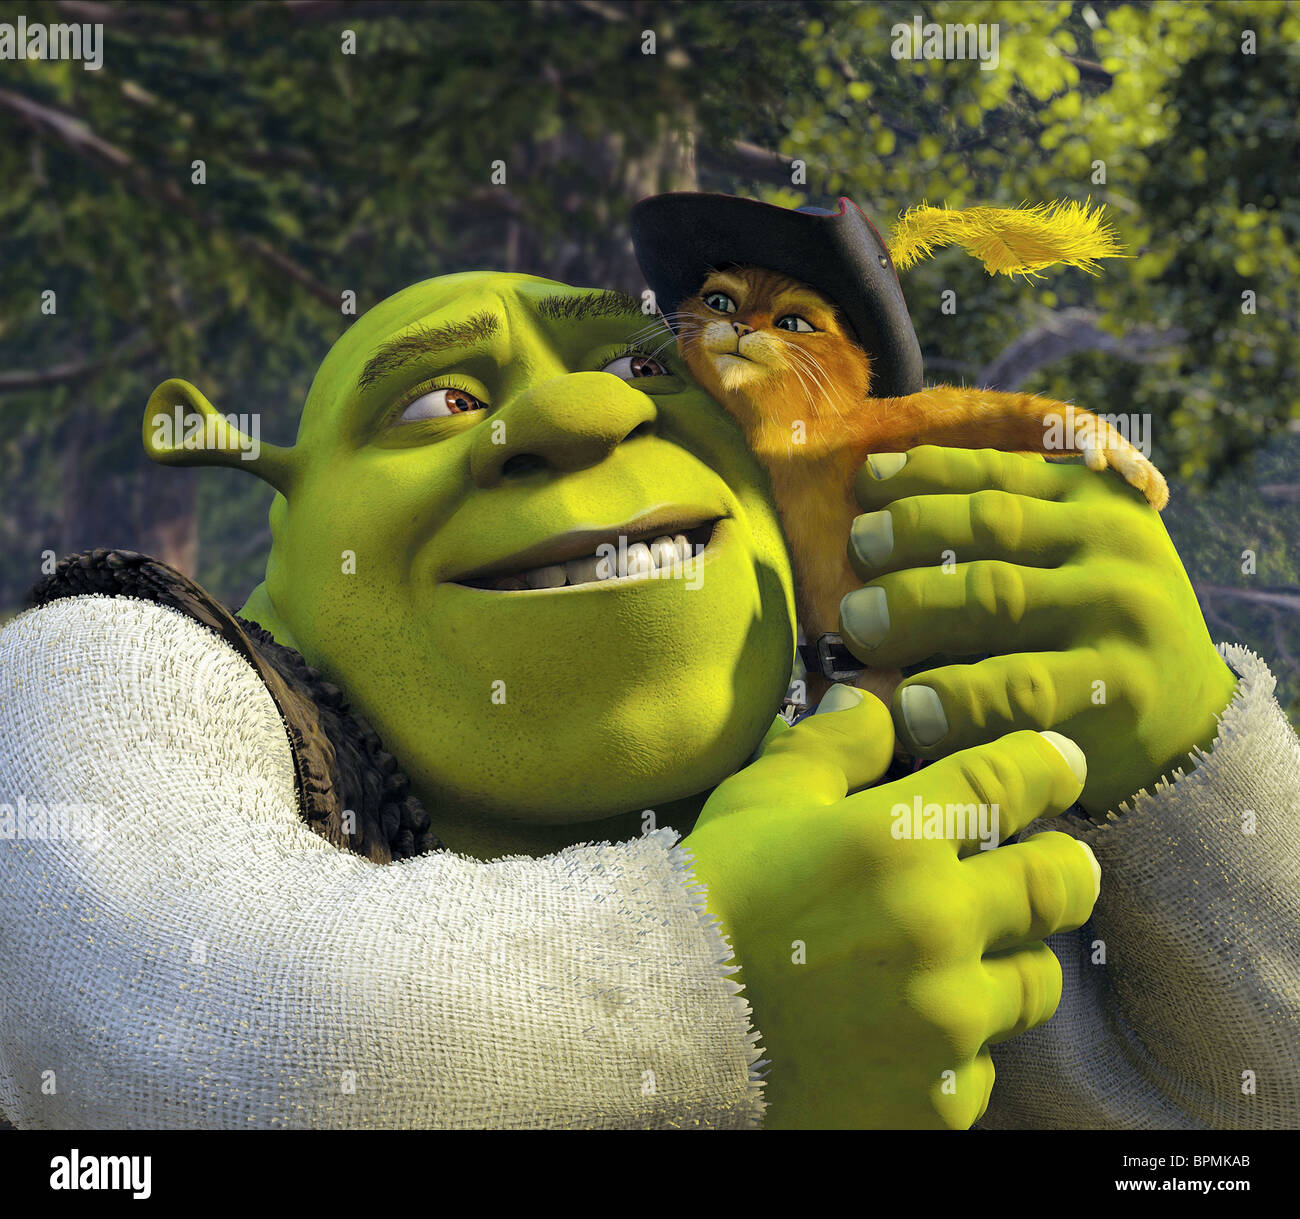 Shrek Puss In Boots Shrek High Resolution Stock Photography and Images -  Alamy